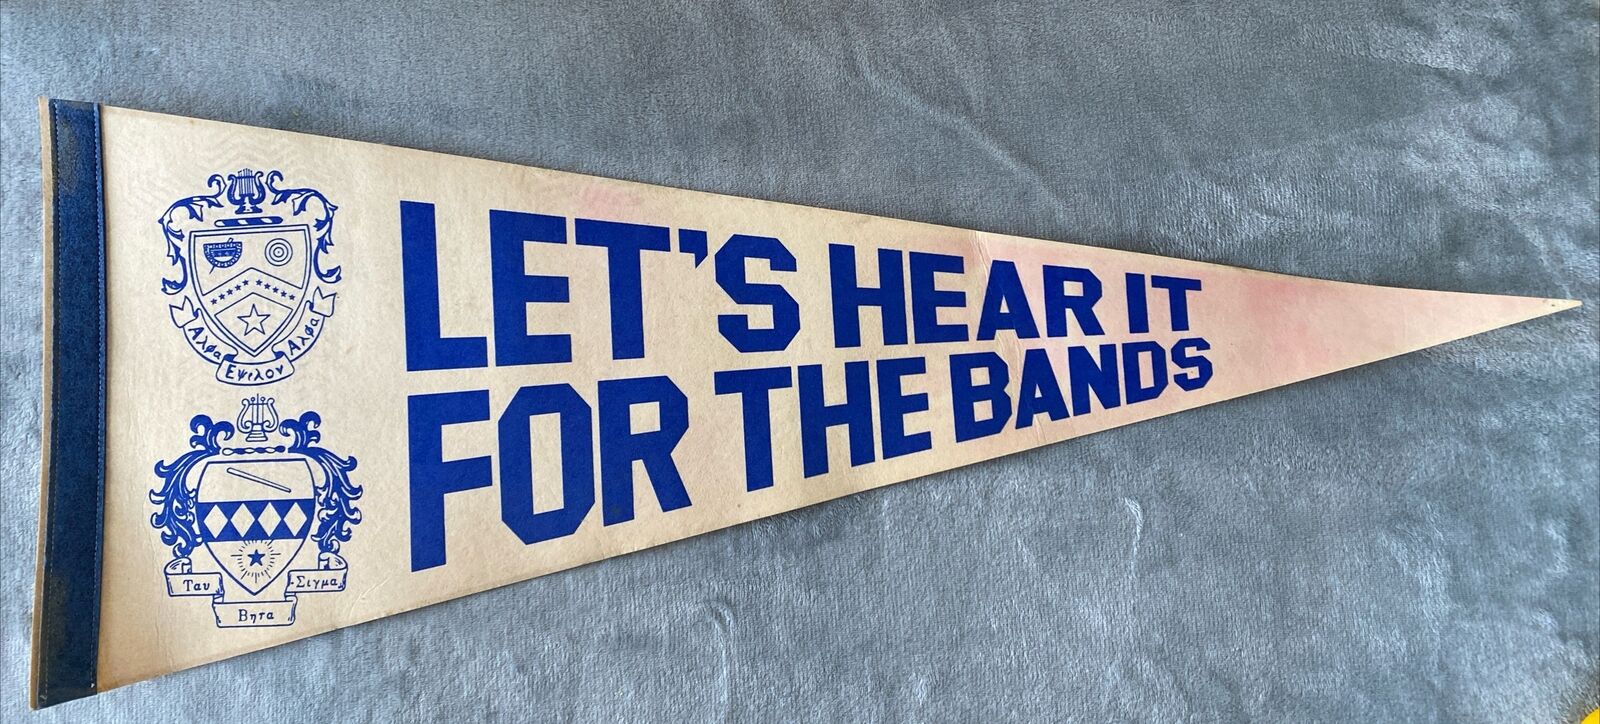 Vintage “Let’s Hear It For The Bands” Felt Pennant 12”x30” White Blue